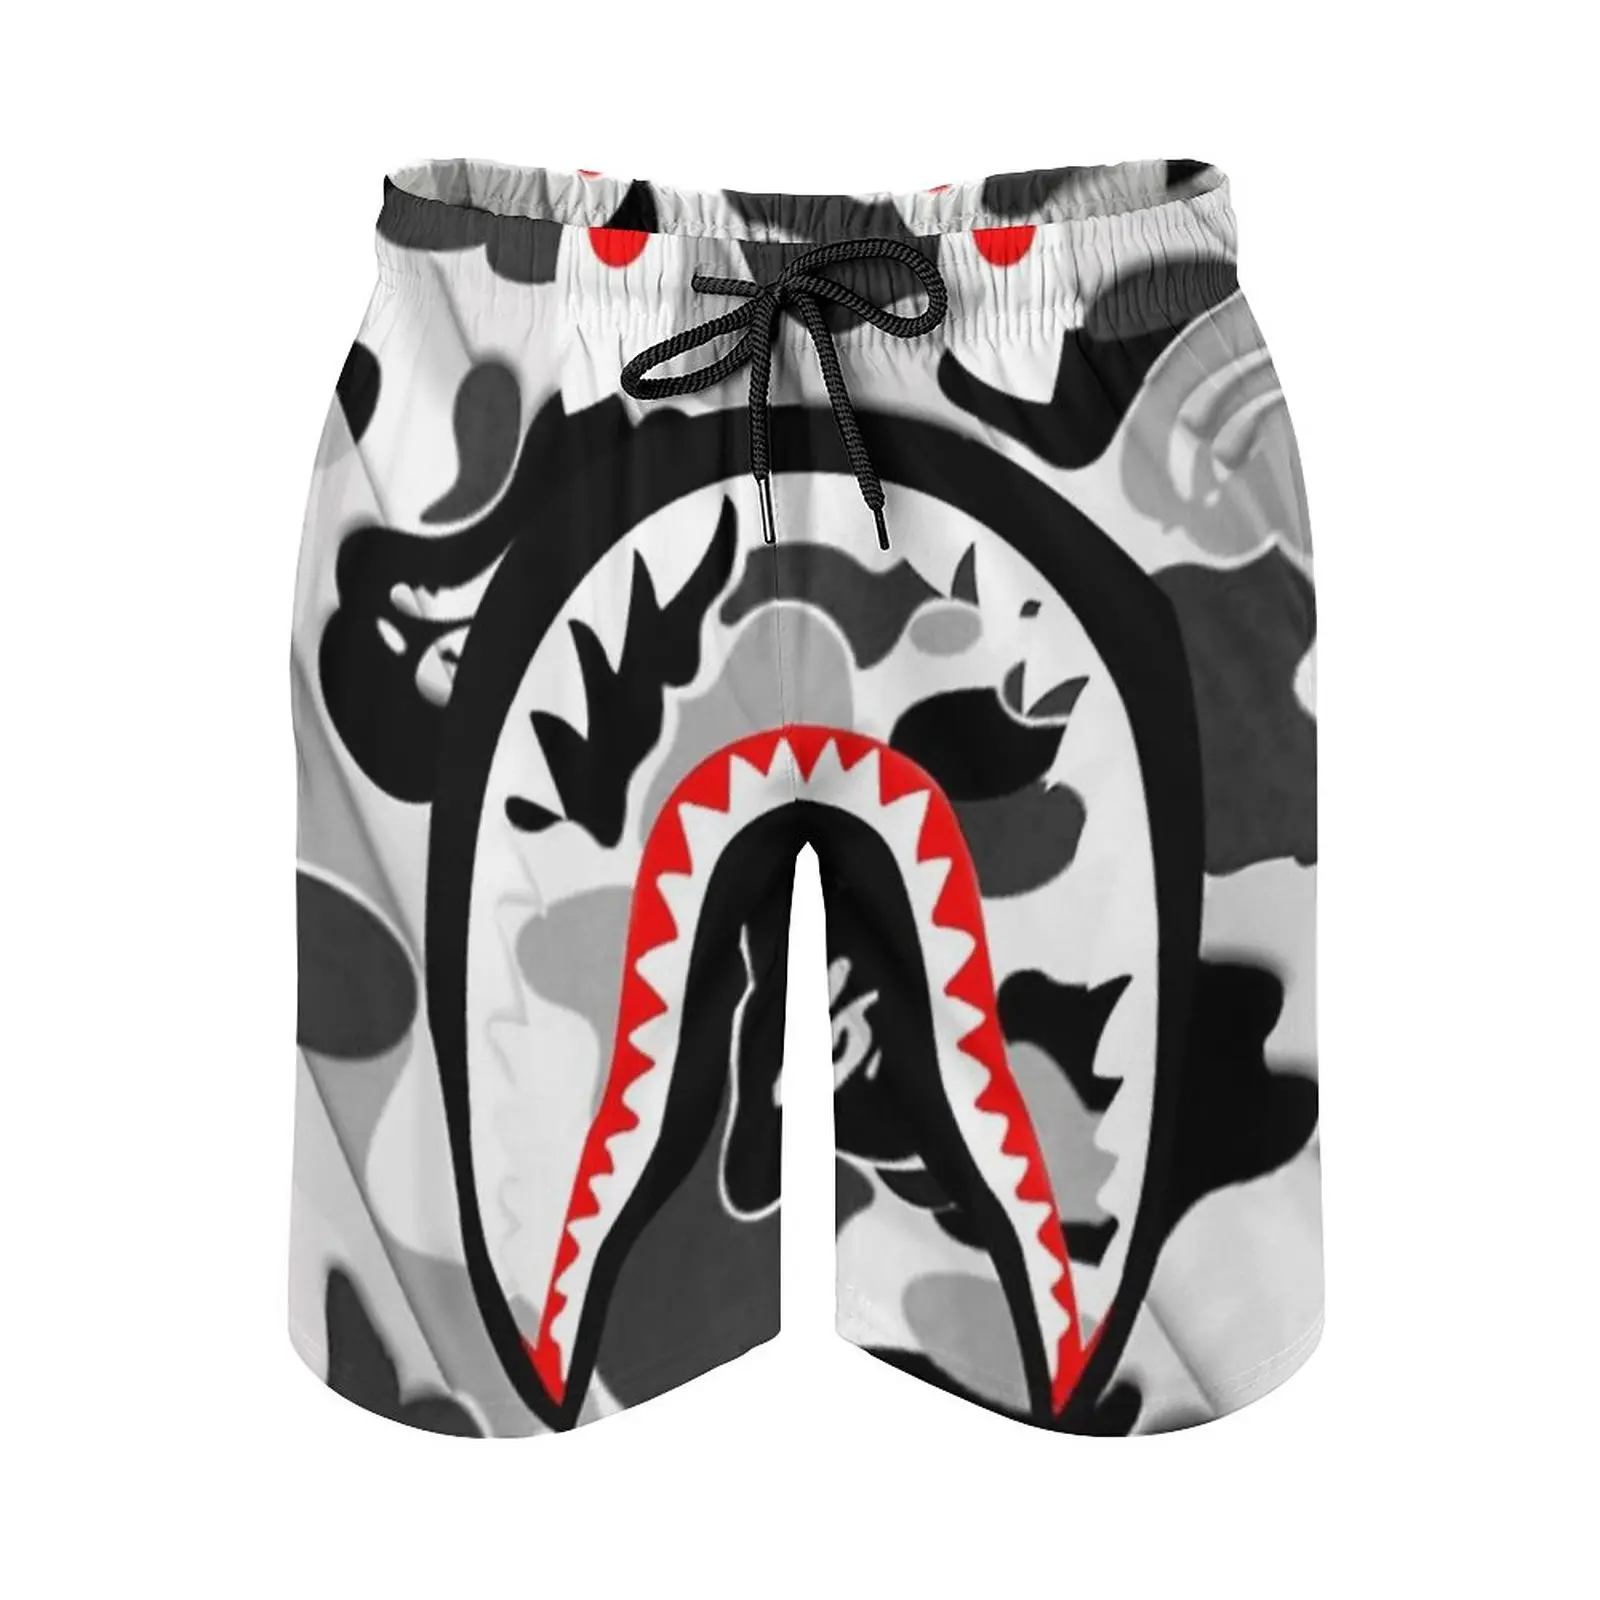 

White Black Bape Men's Beach Shorts With Mesh Lining Surfing Pants Swim Trunks Most Relevant Trending Top Selling Recent Most